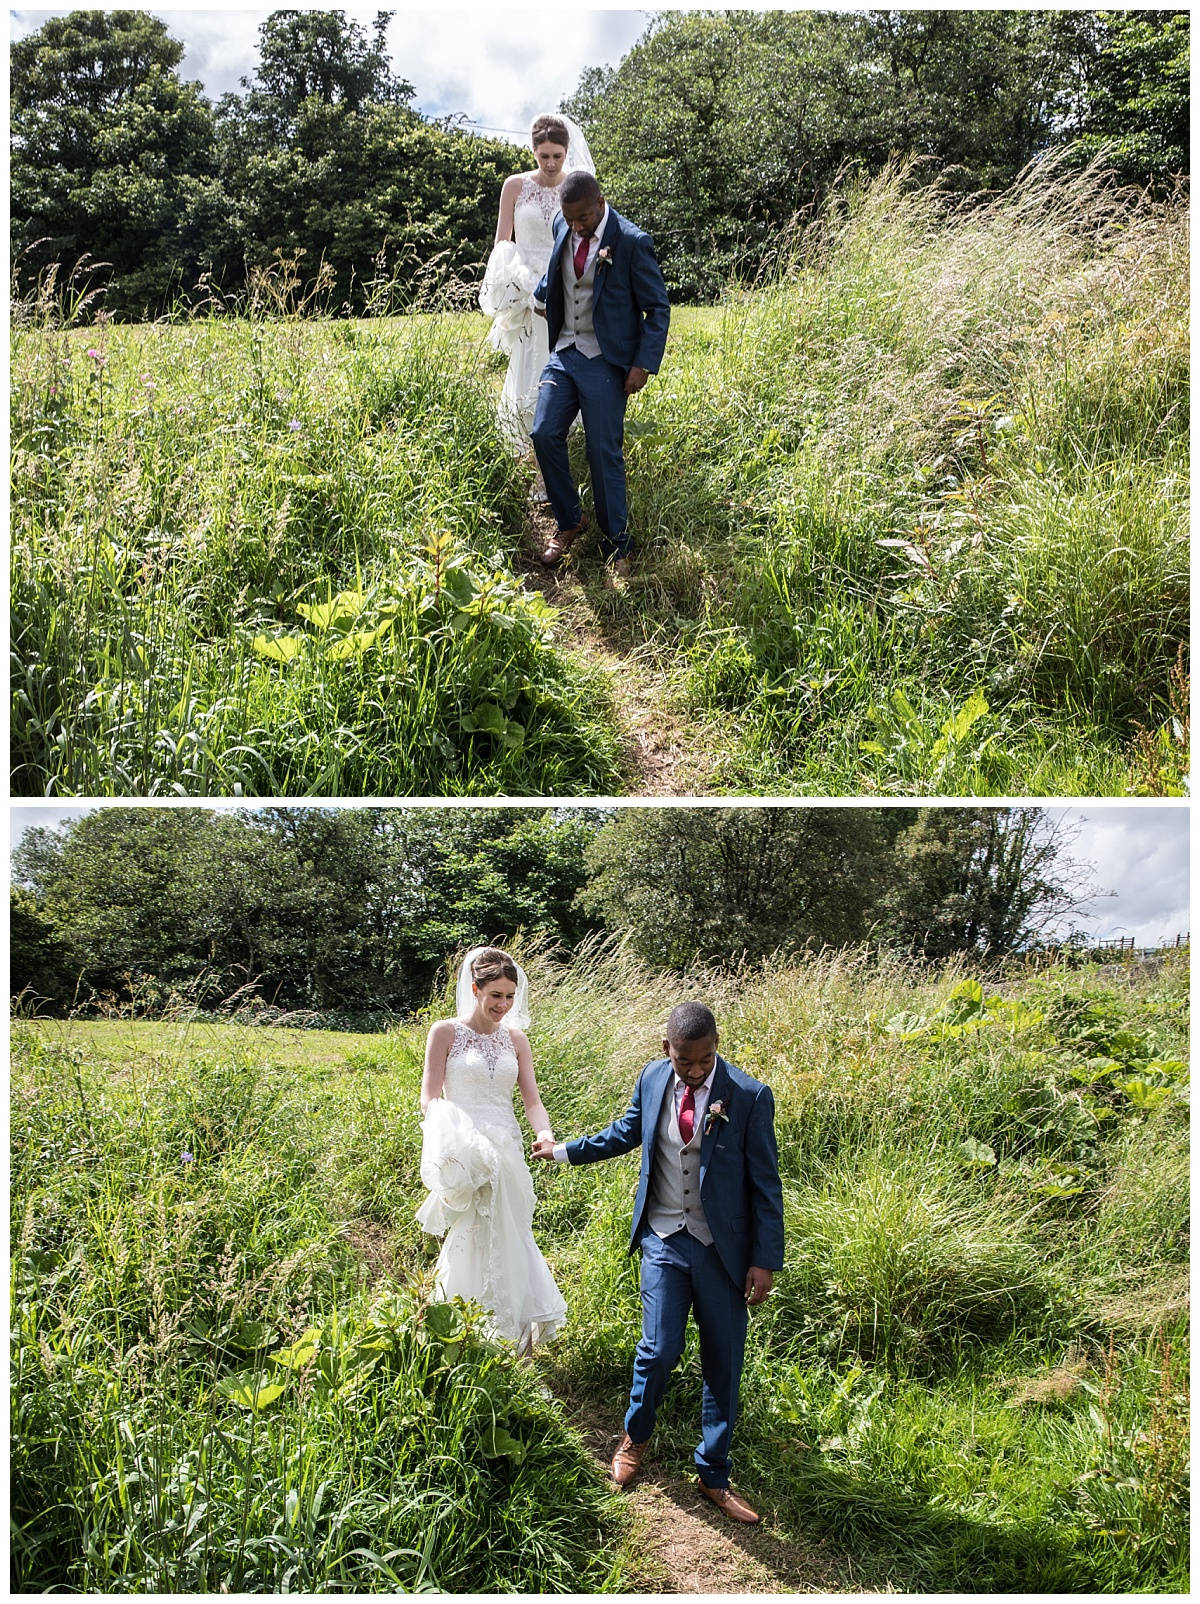 Wedding Photography Manchester - Clair and Peter's Bashal Barn Wedding Day 44